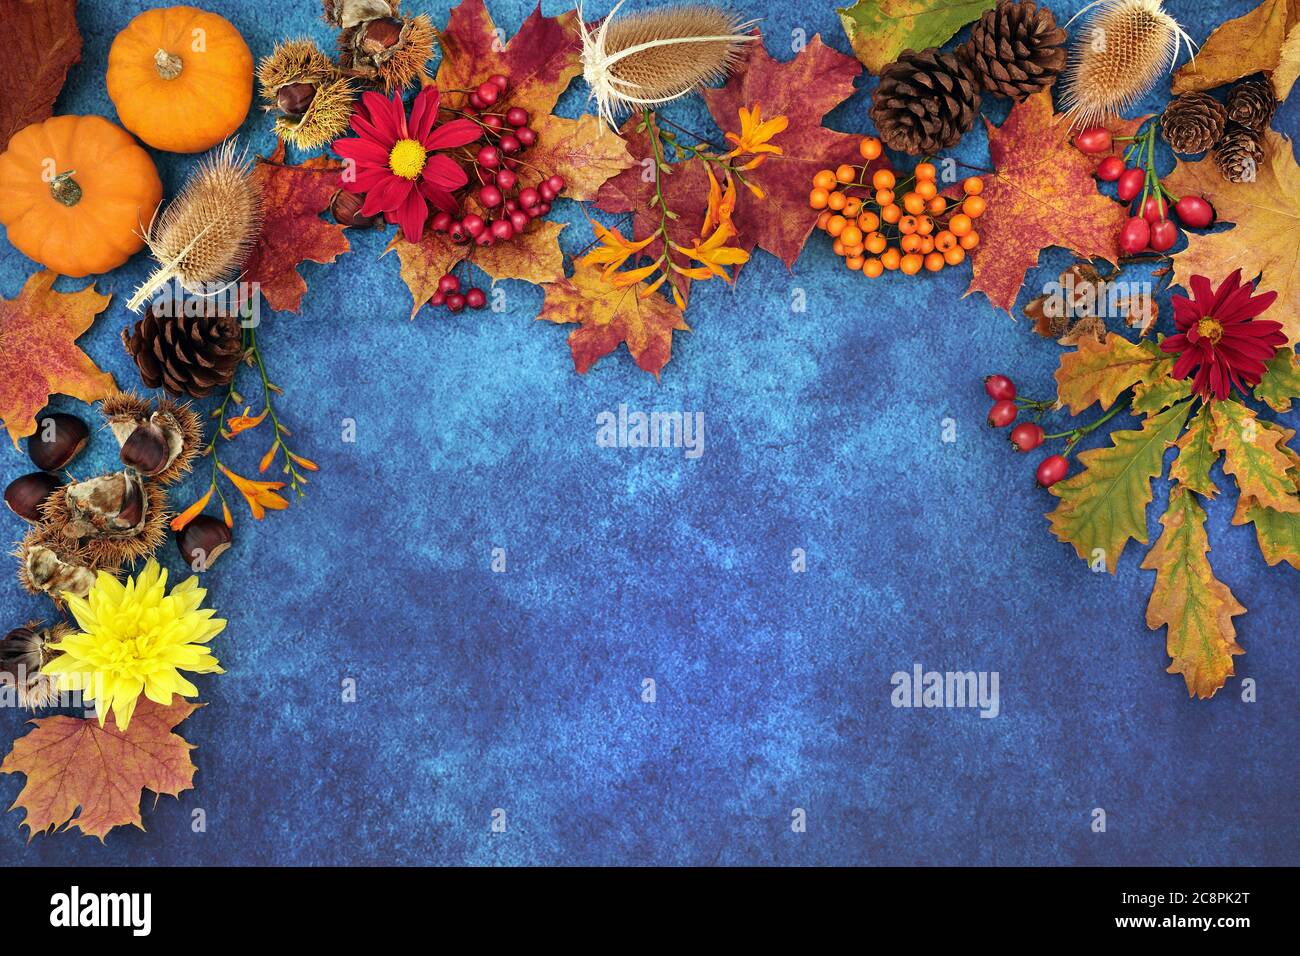 Autumn harvest festival background border with food, flora and fauna on mottled blue grunge background. Top view. Stock Photo